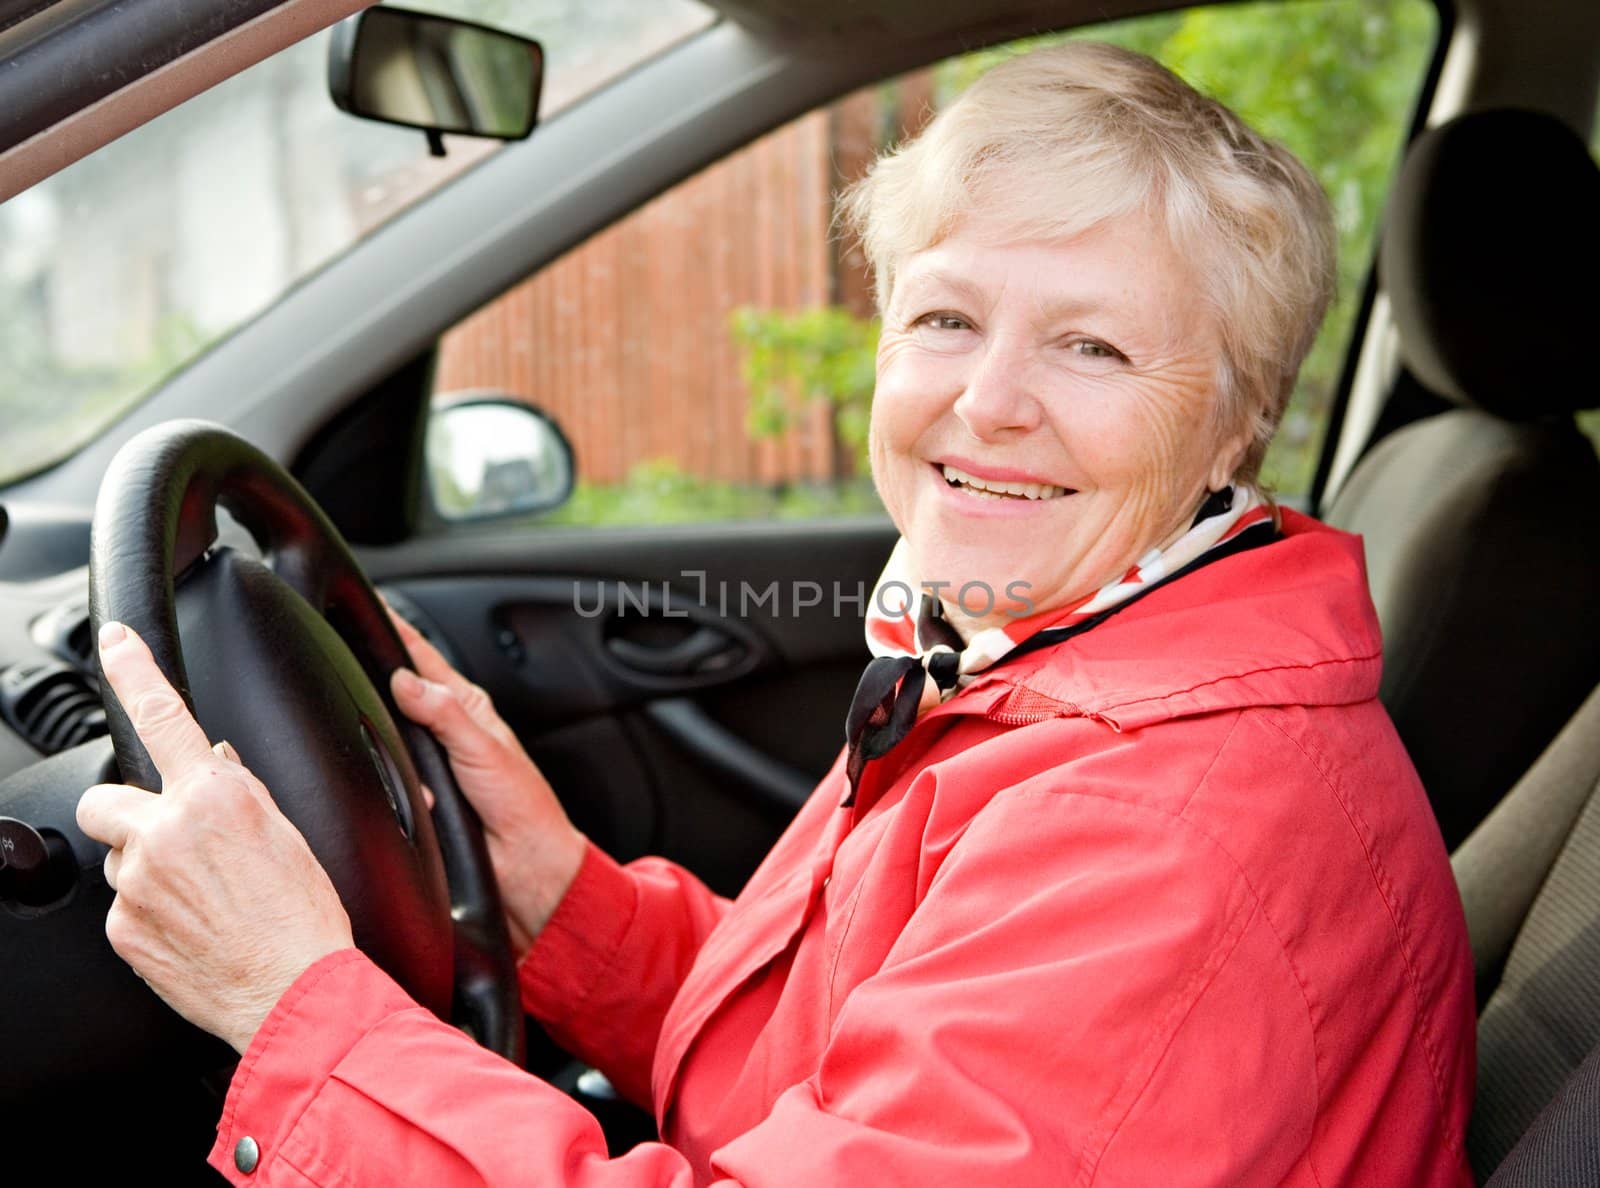 The smiling elderly woman in a red jacket at the wheel the car
